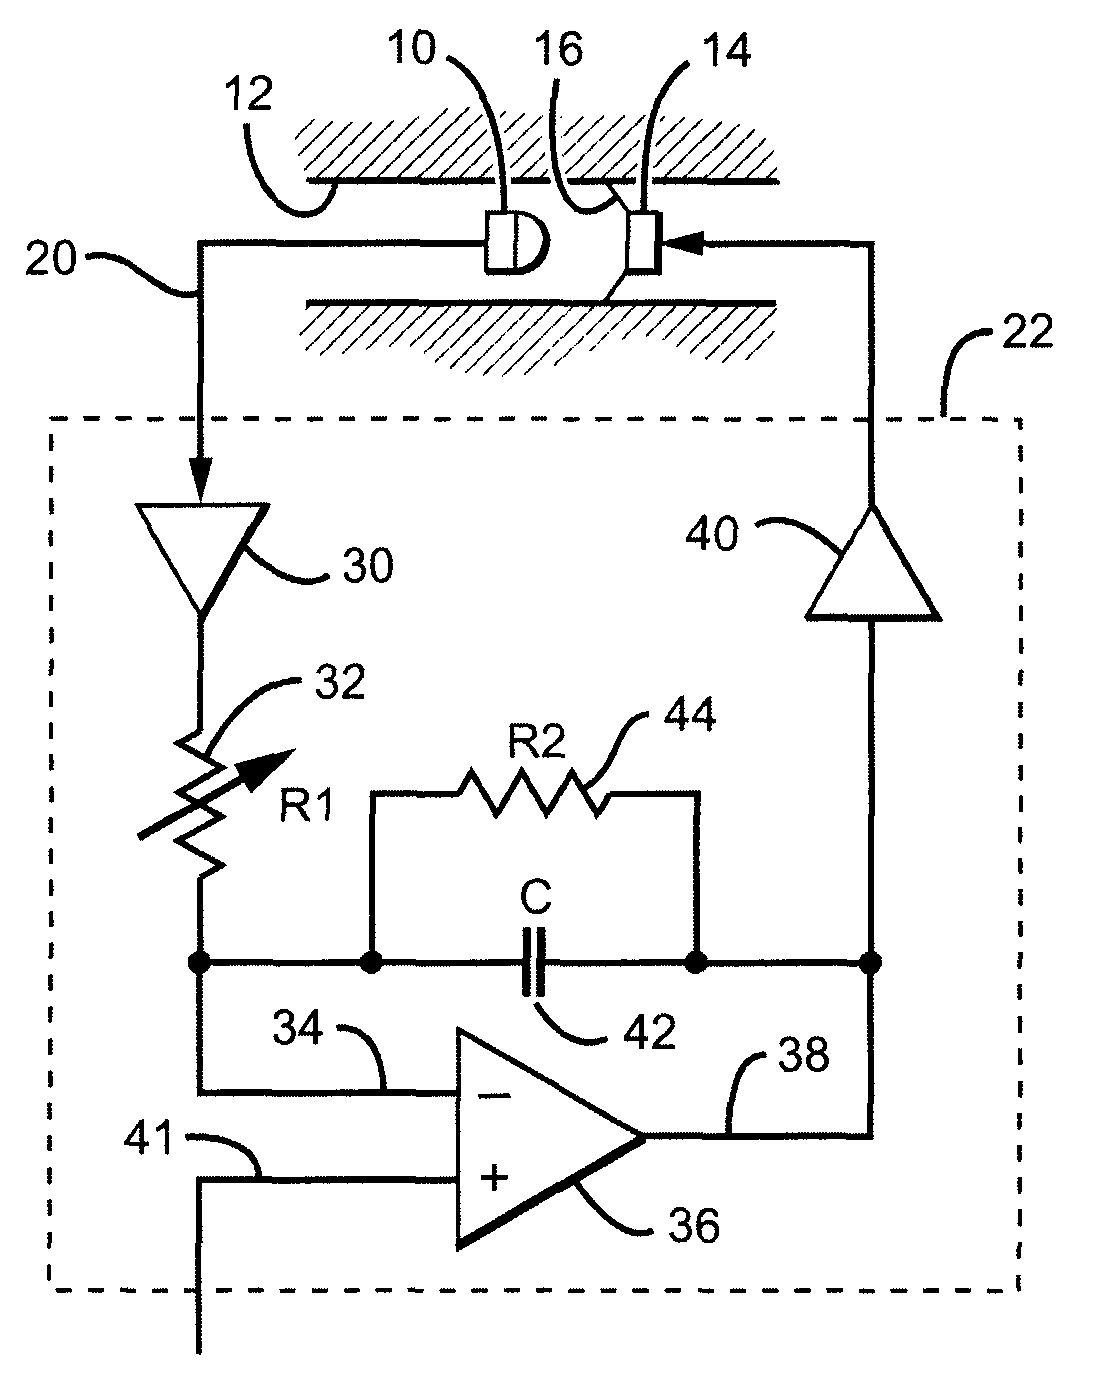 Personal hearing control system and method